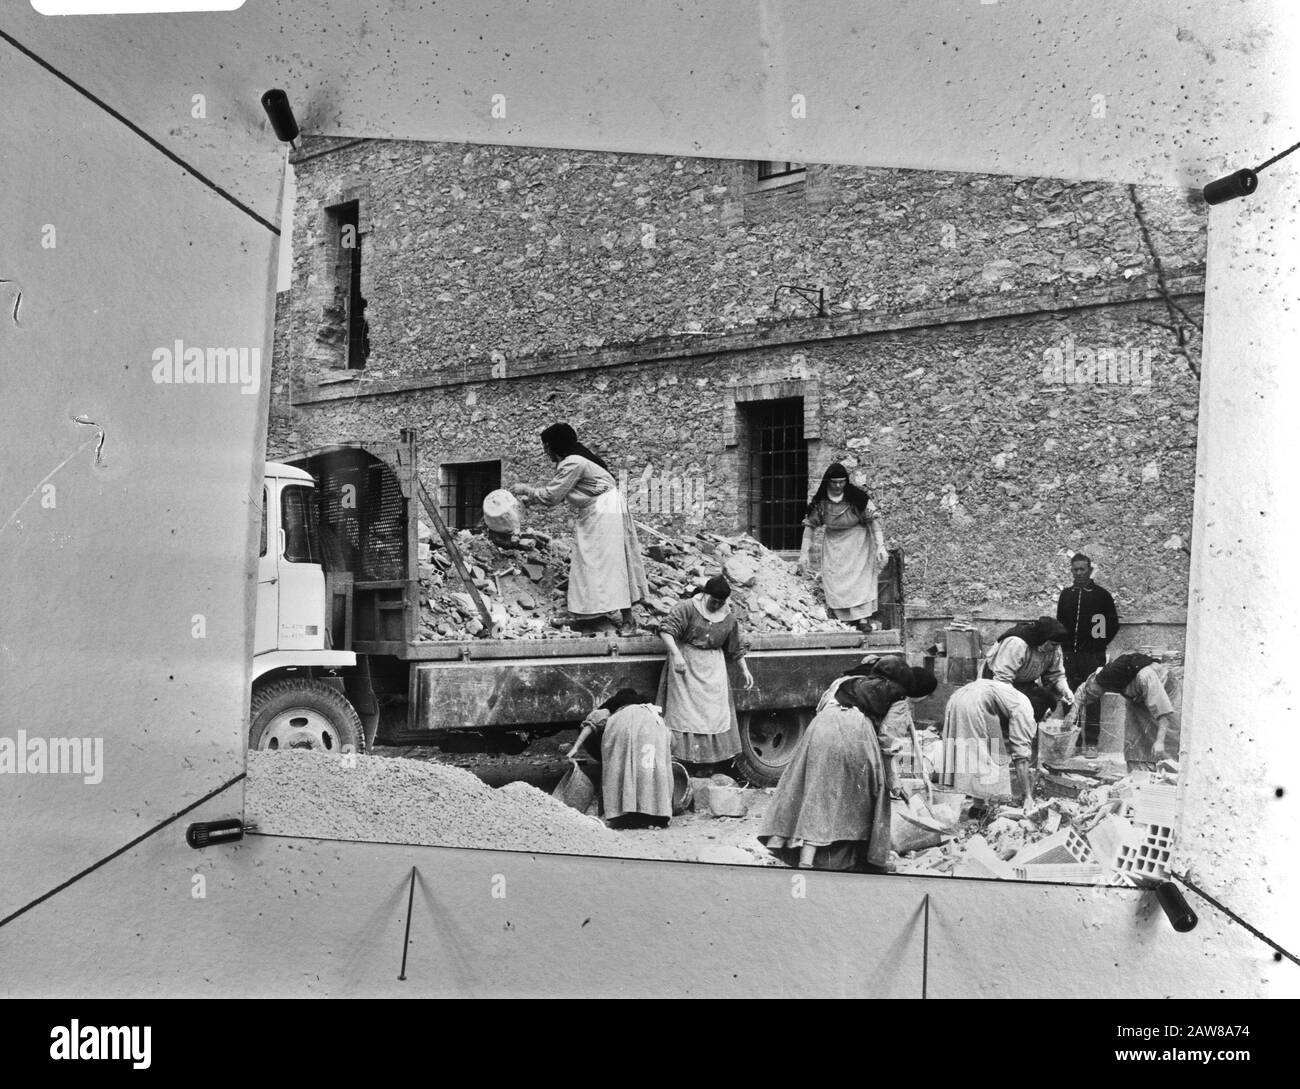 Nuns renovate convent, during work Date: May 7, 1973 Keywords: nuns, monasteries Stock Photo